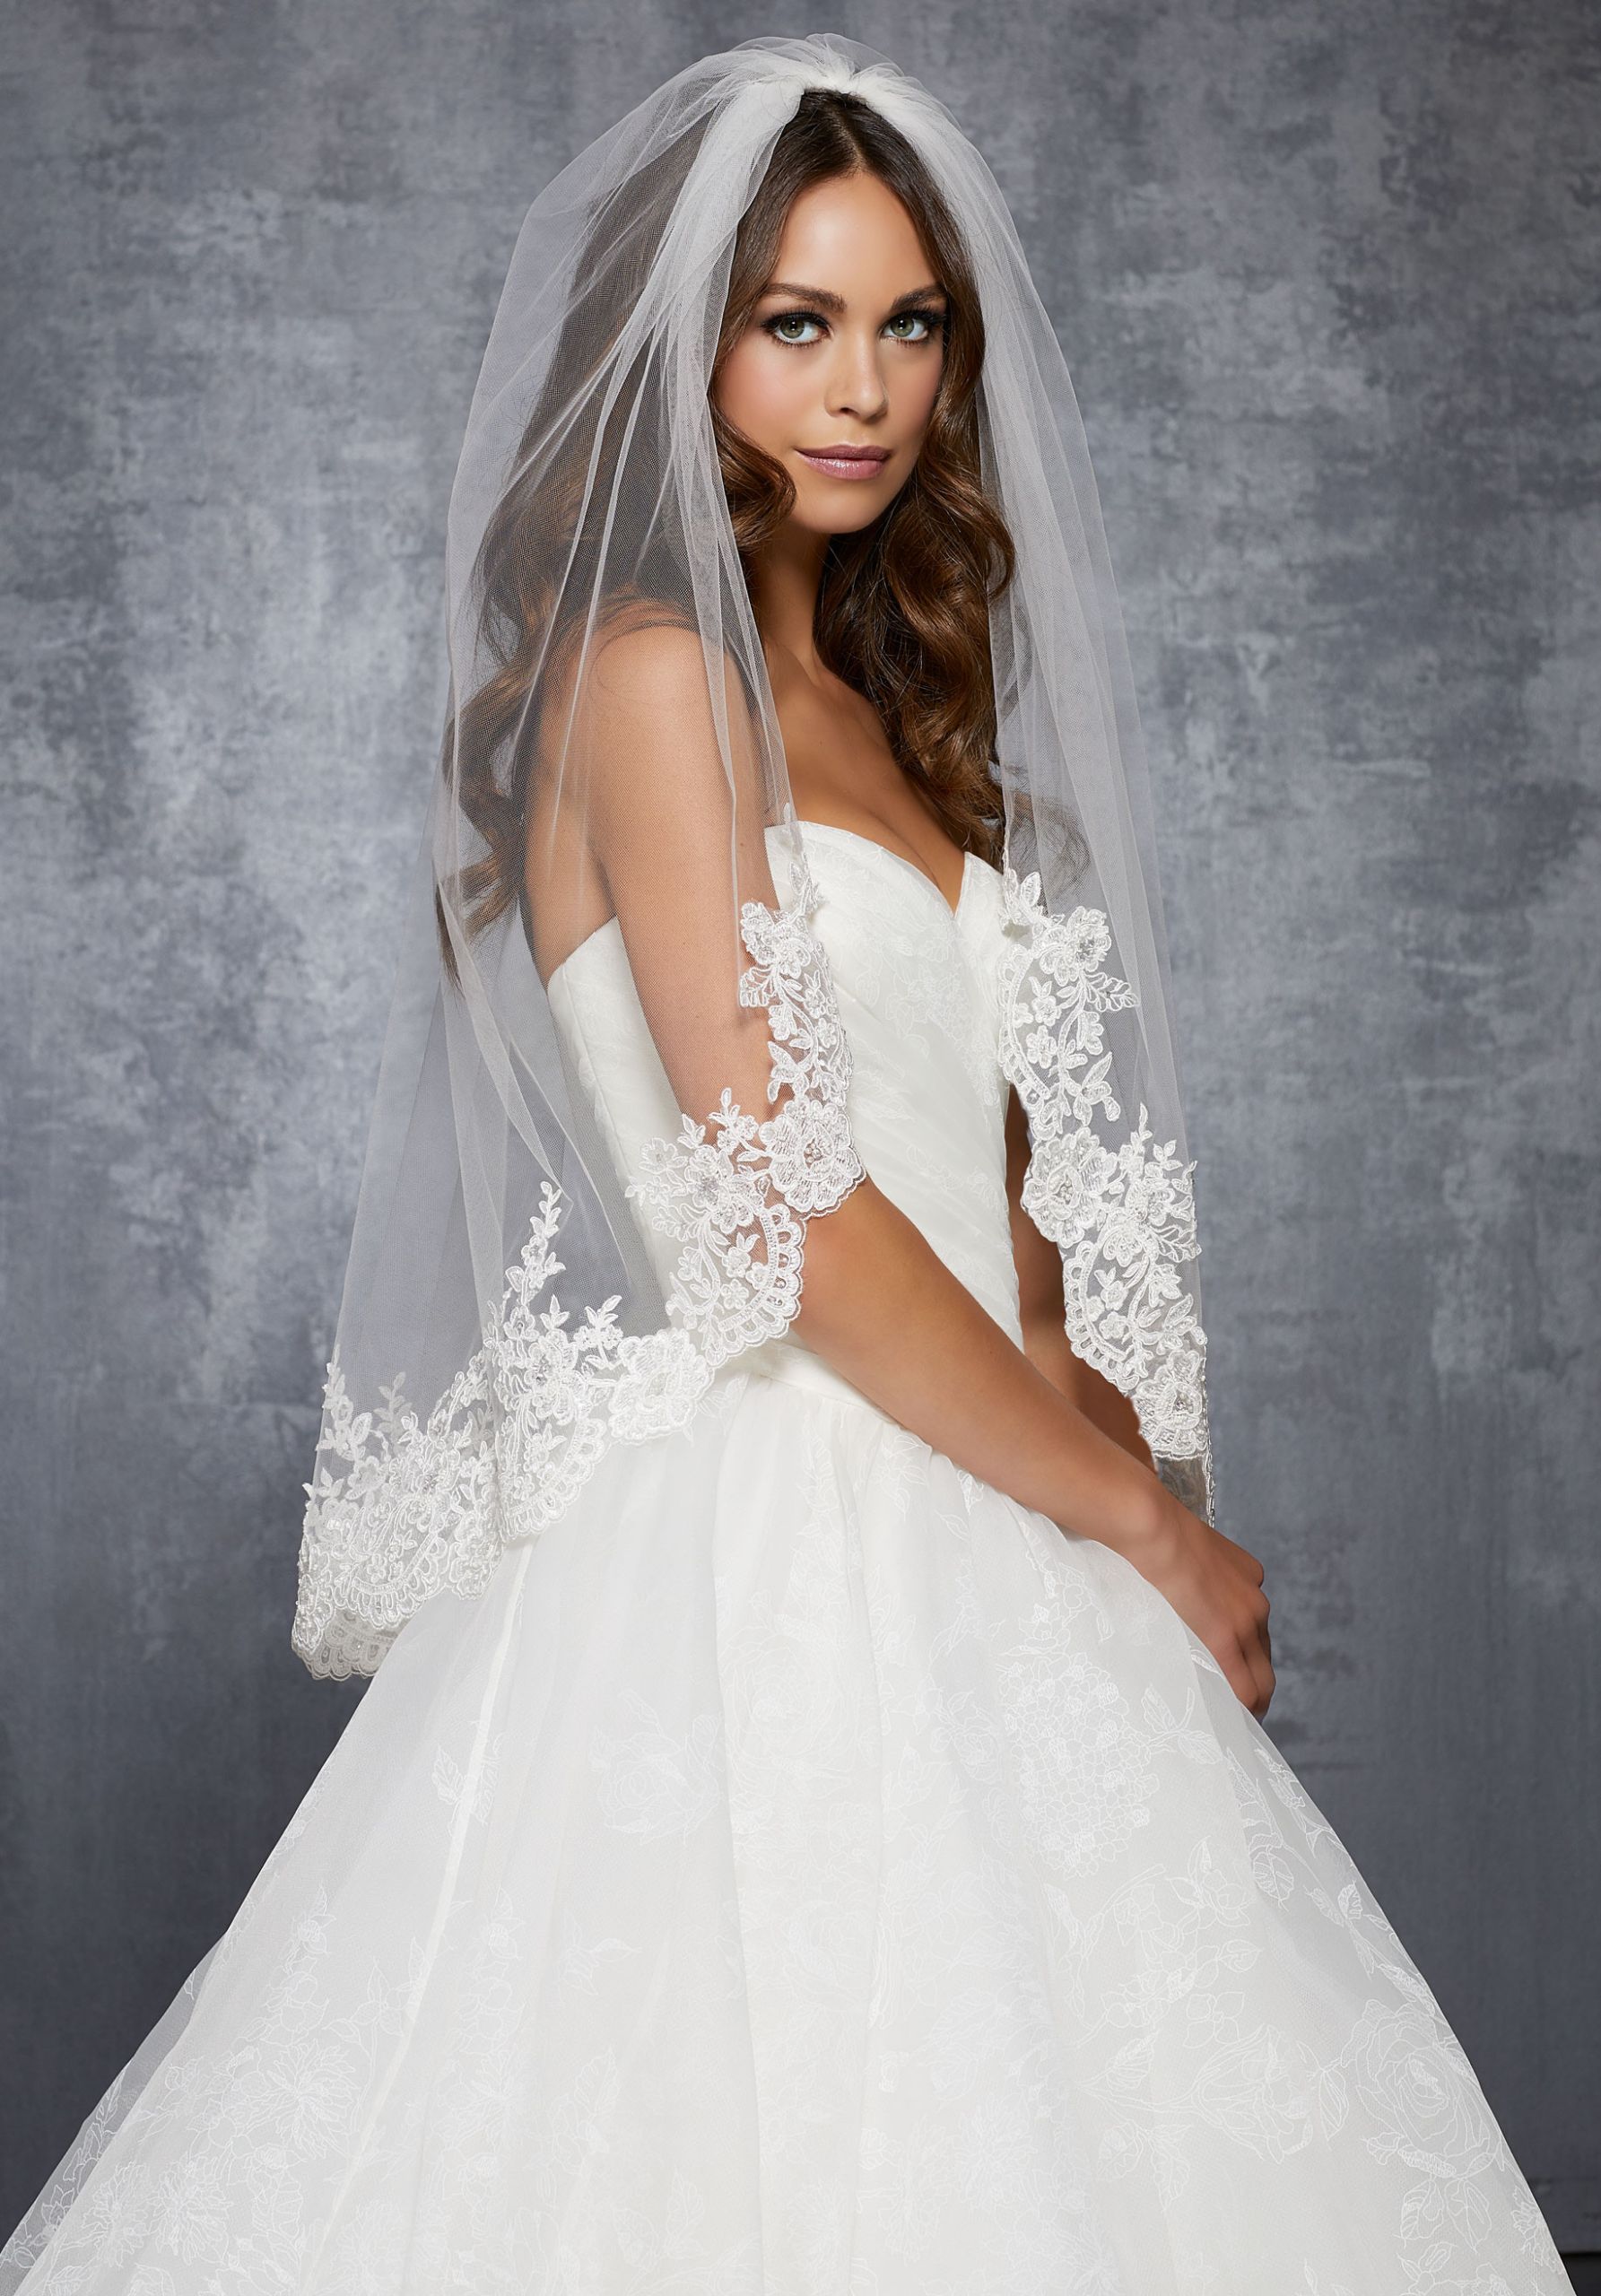 Wedding Dress With Veil
 Veil with Lace Beaded with Sequins and Rhinestones